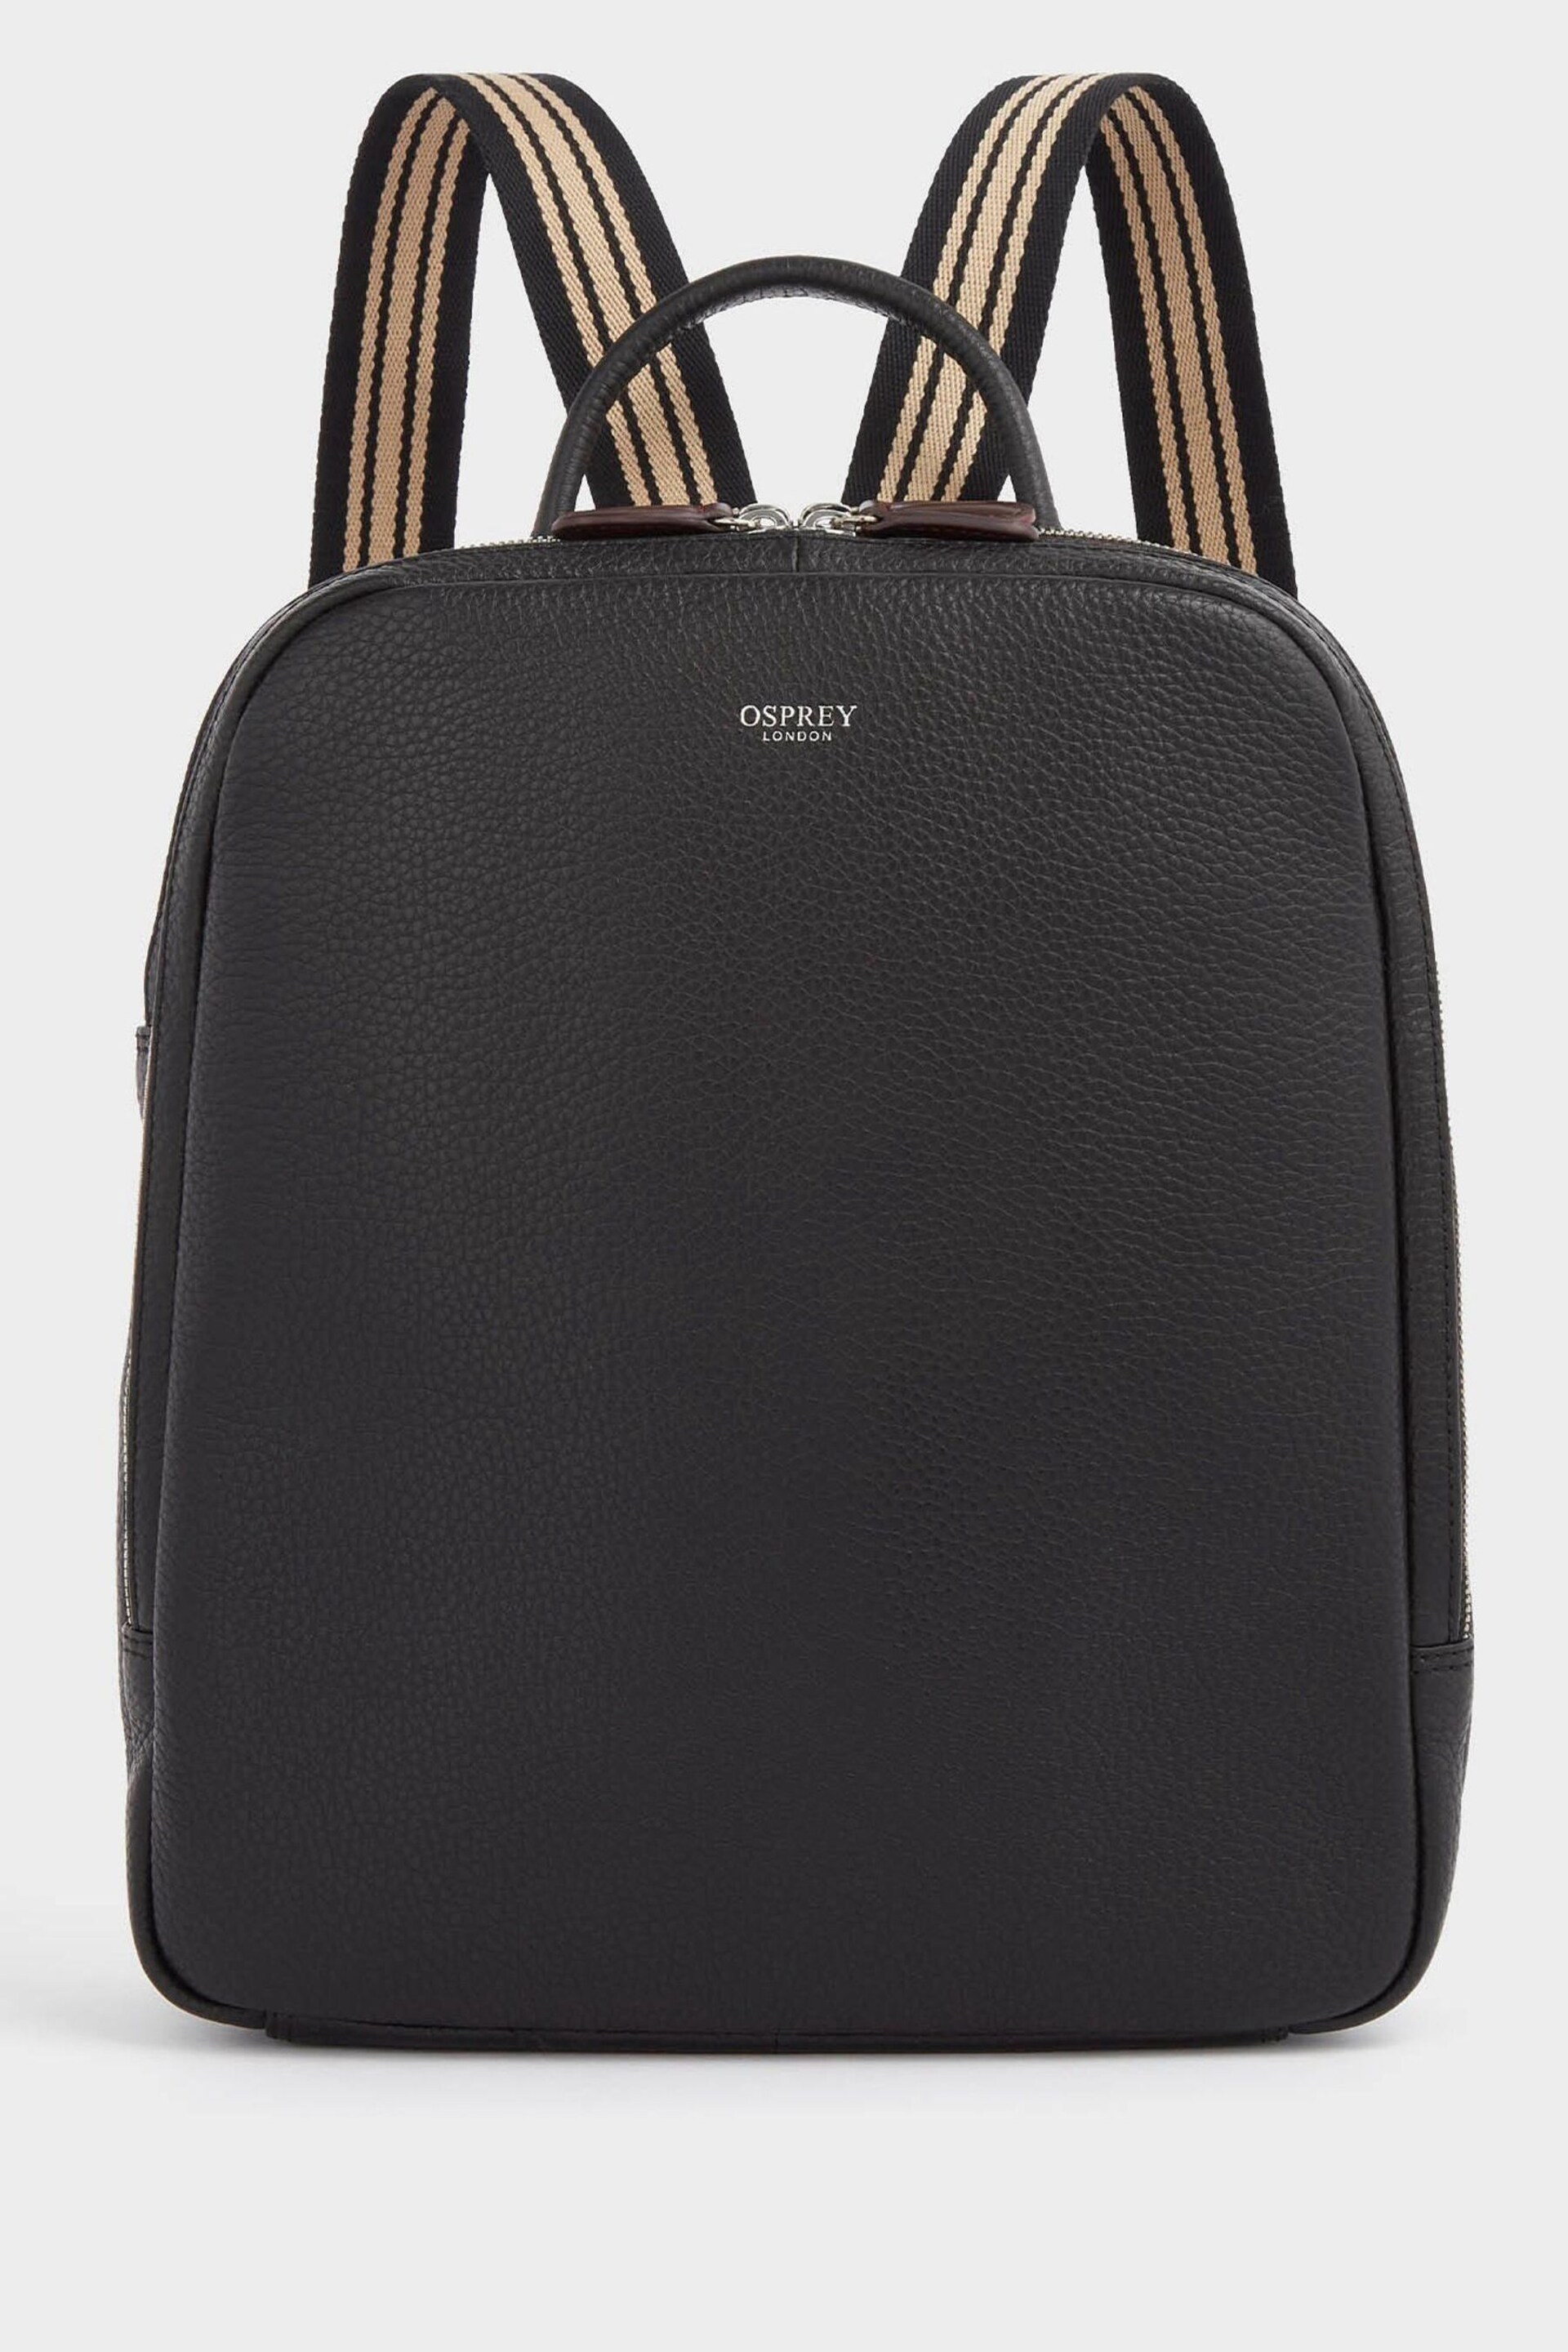 Osprey London The Chiswick Leather Backpack - Image 2 of 6